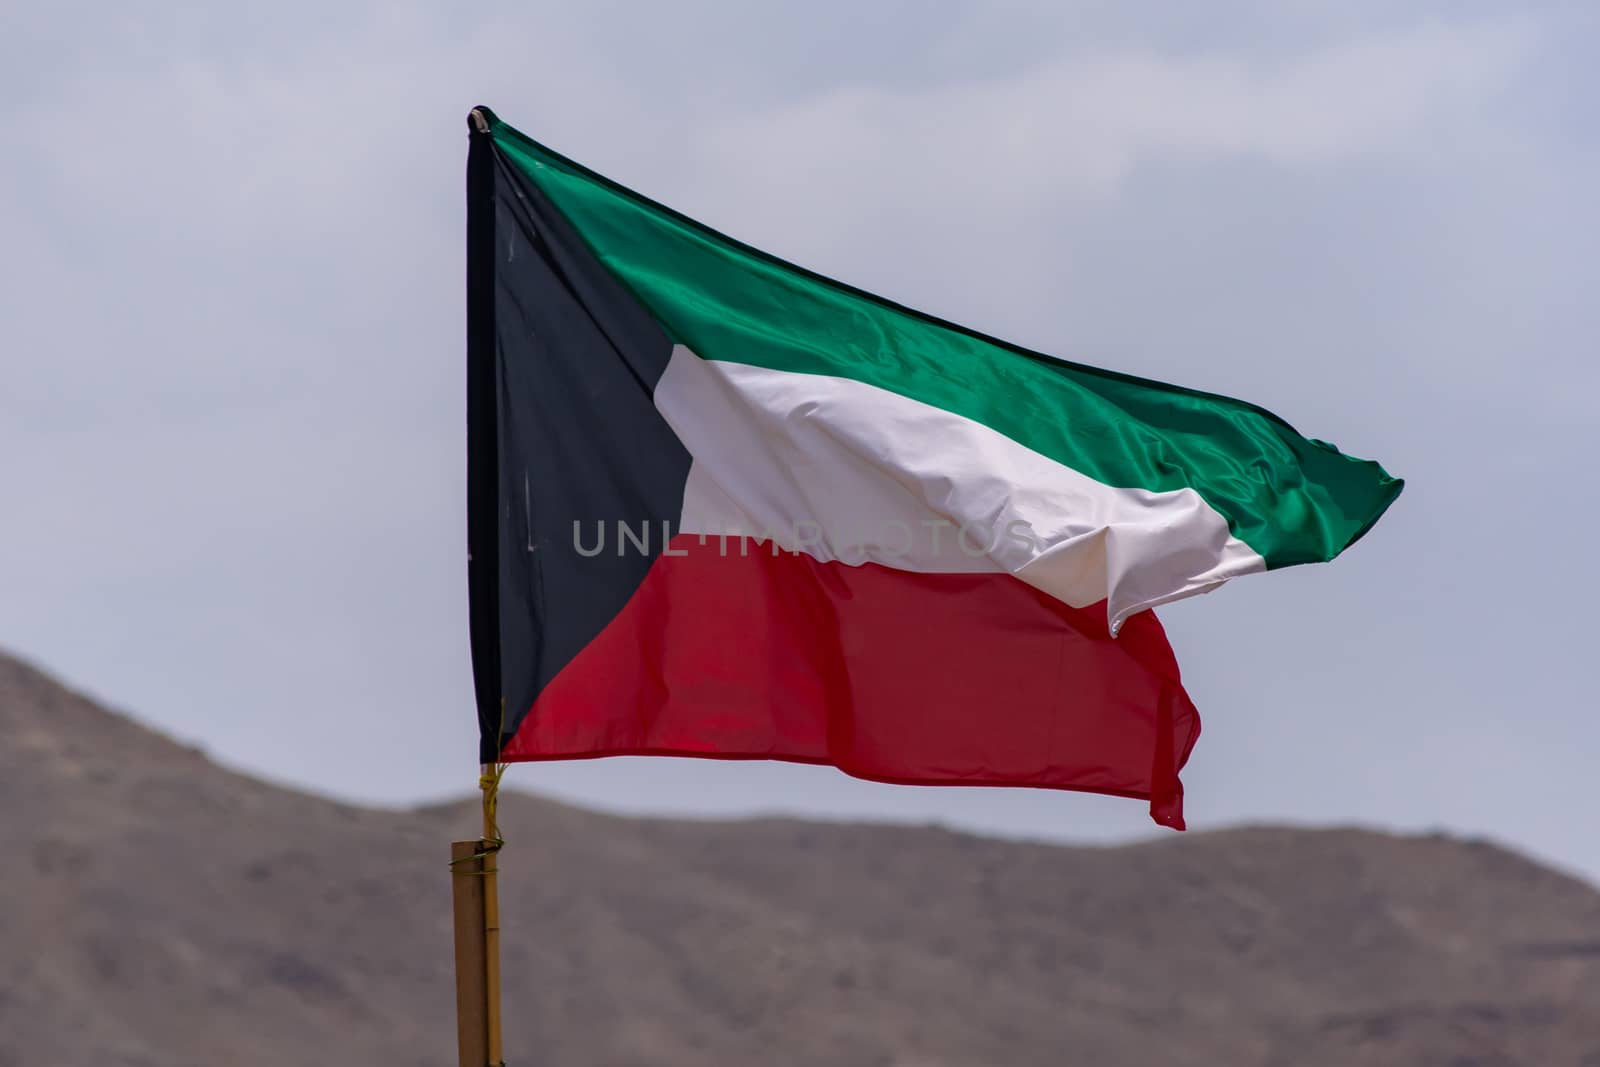 Kuwait Flag flying and waving in the sunshine with a blue sky and mountainous background.